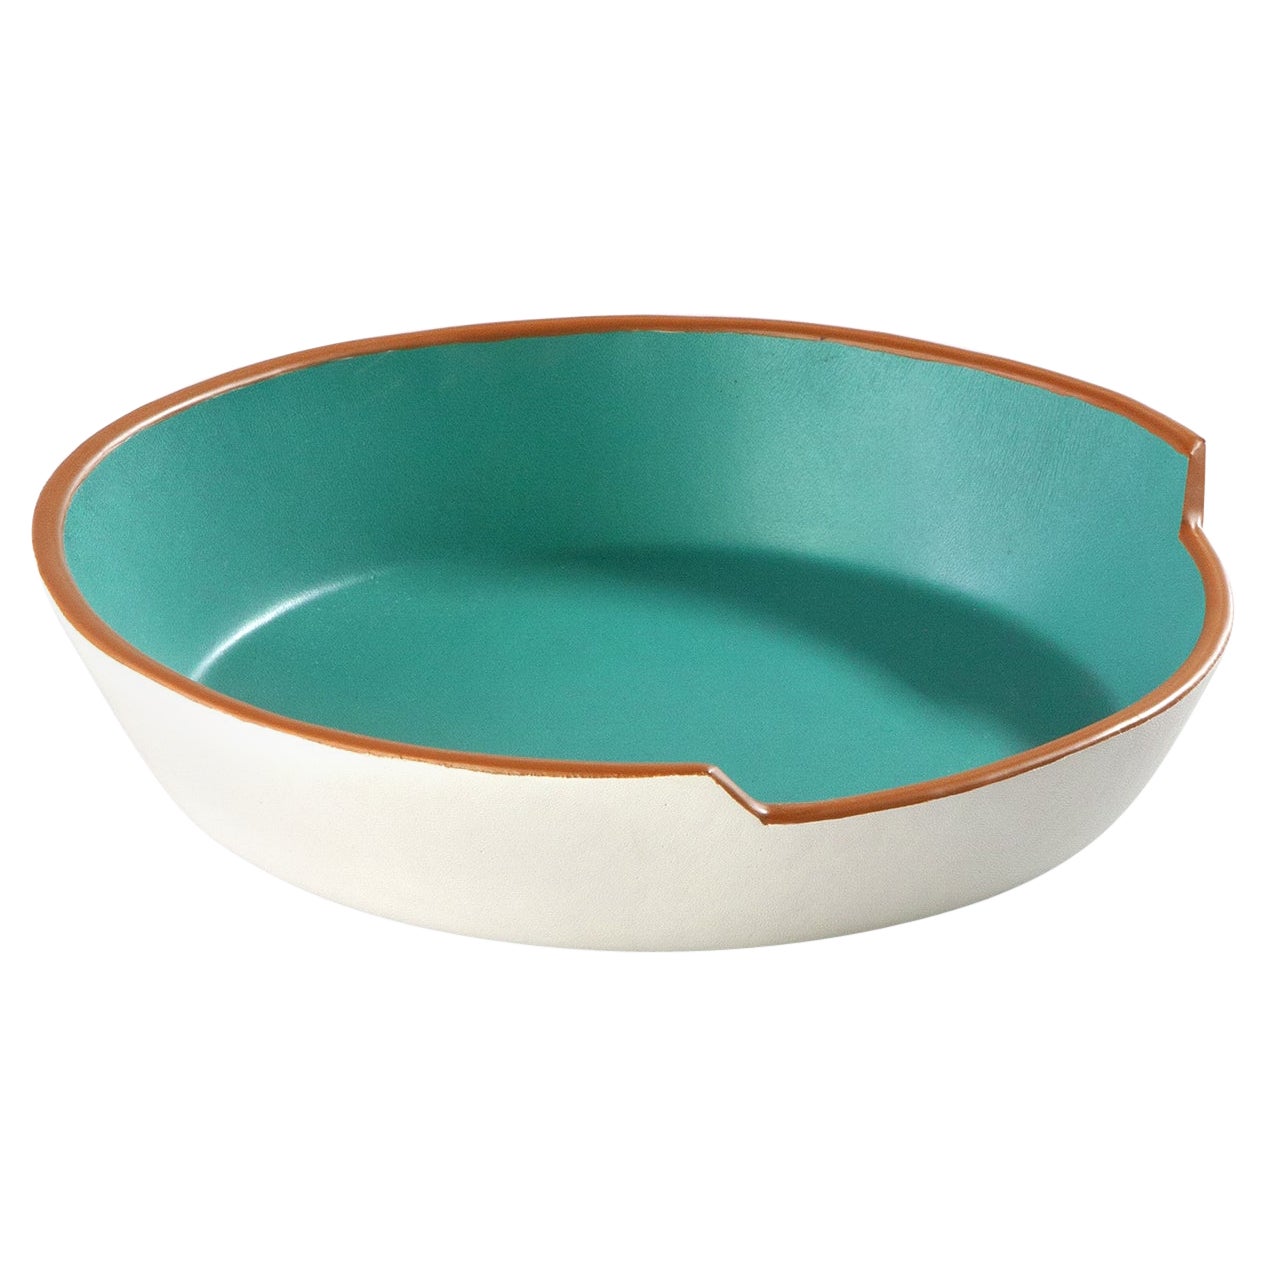 Handmade Luxury Leather Bowl in Teal and White